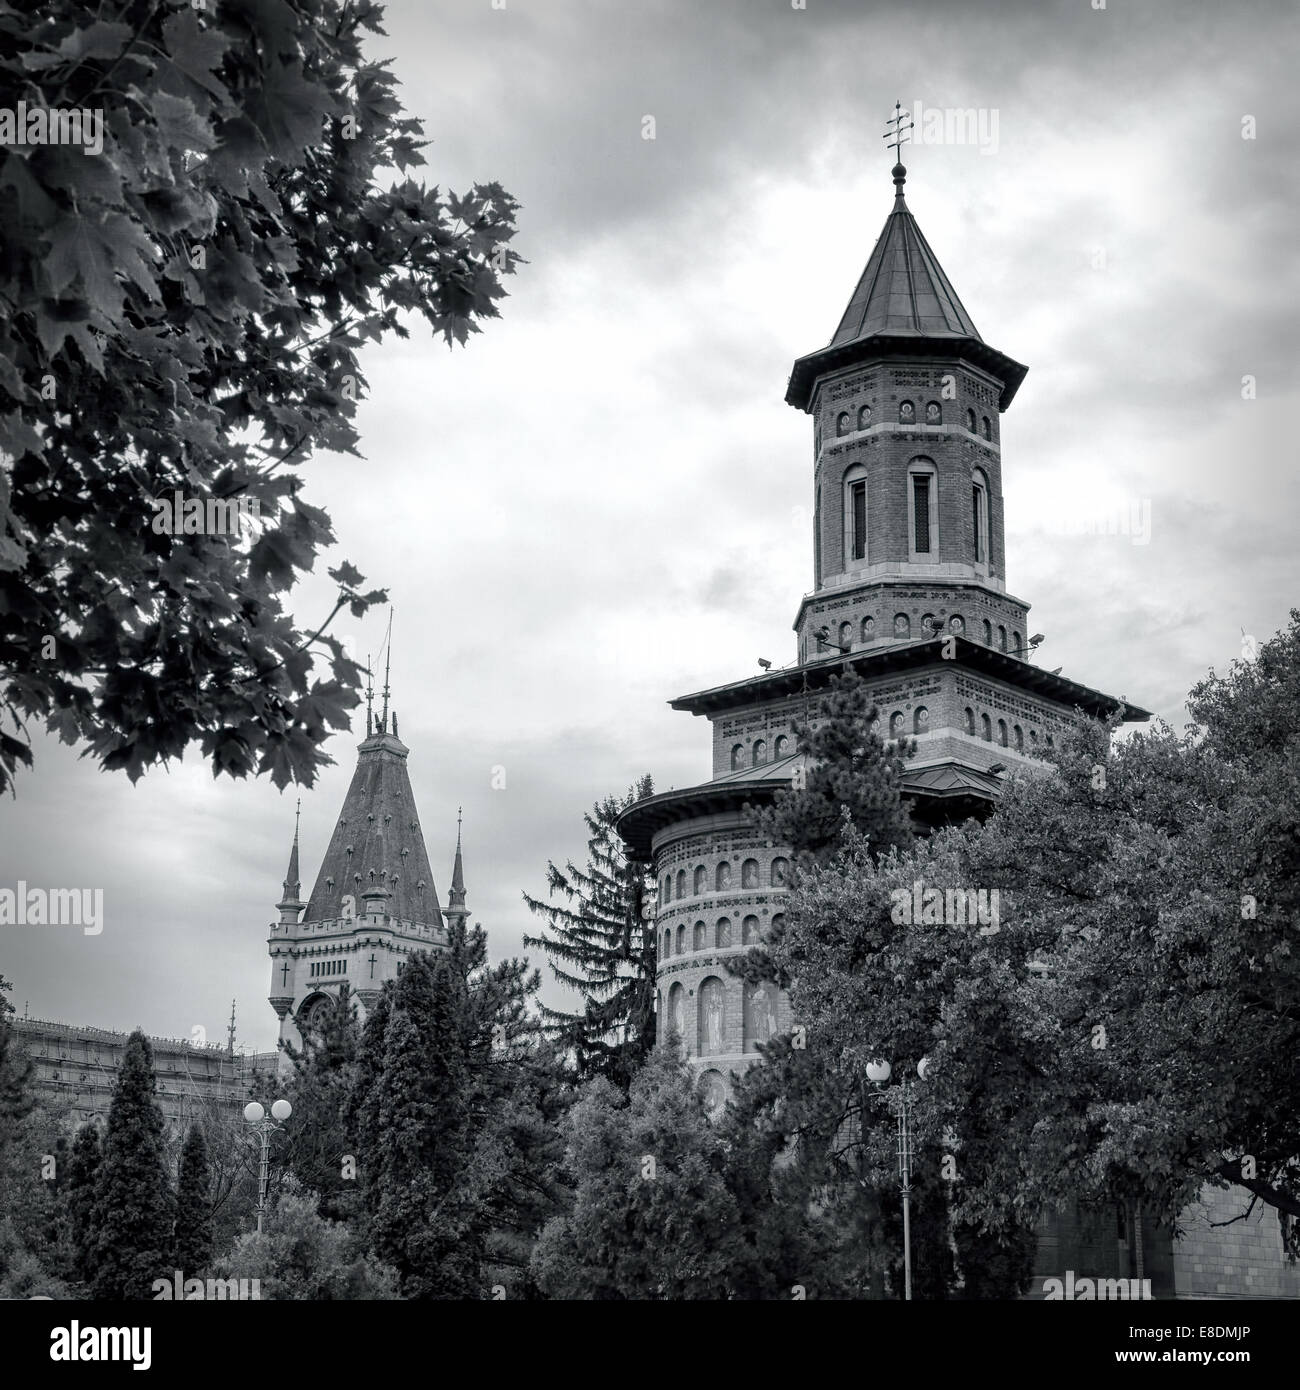 Black and white photograph of Saint Nicolae (Nicholas) Church with Culture Palace in the background in Iasi, Romania. Stock Photo